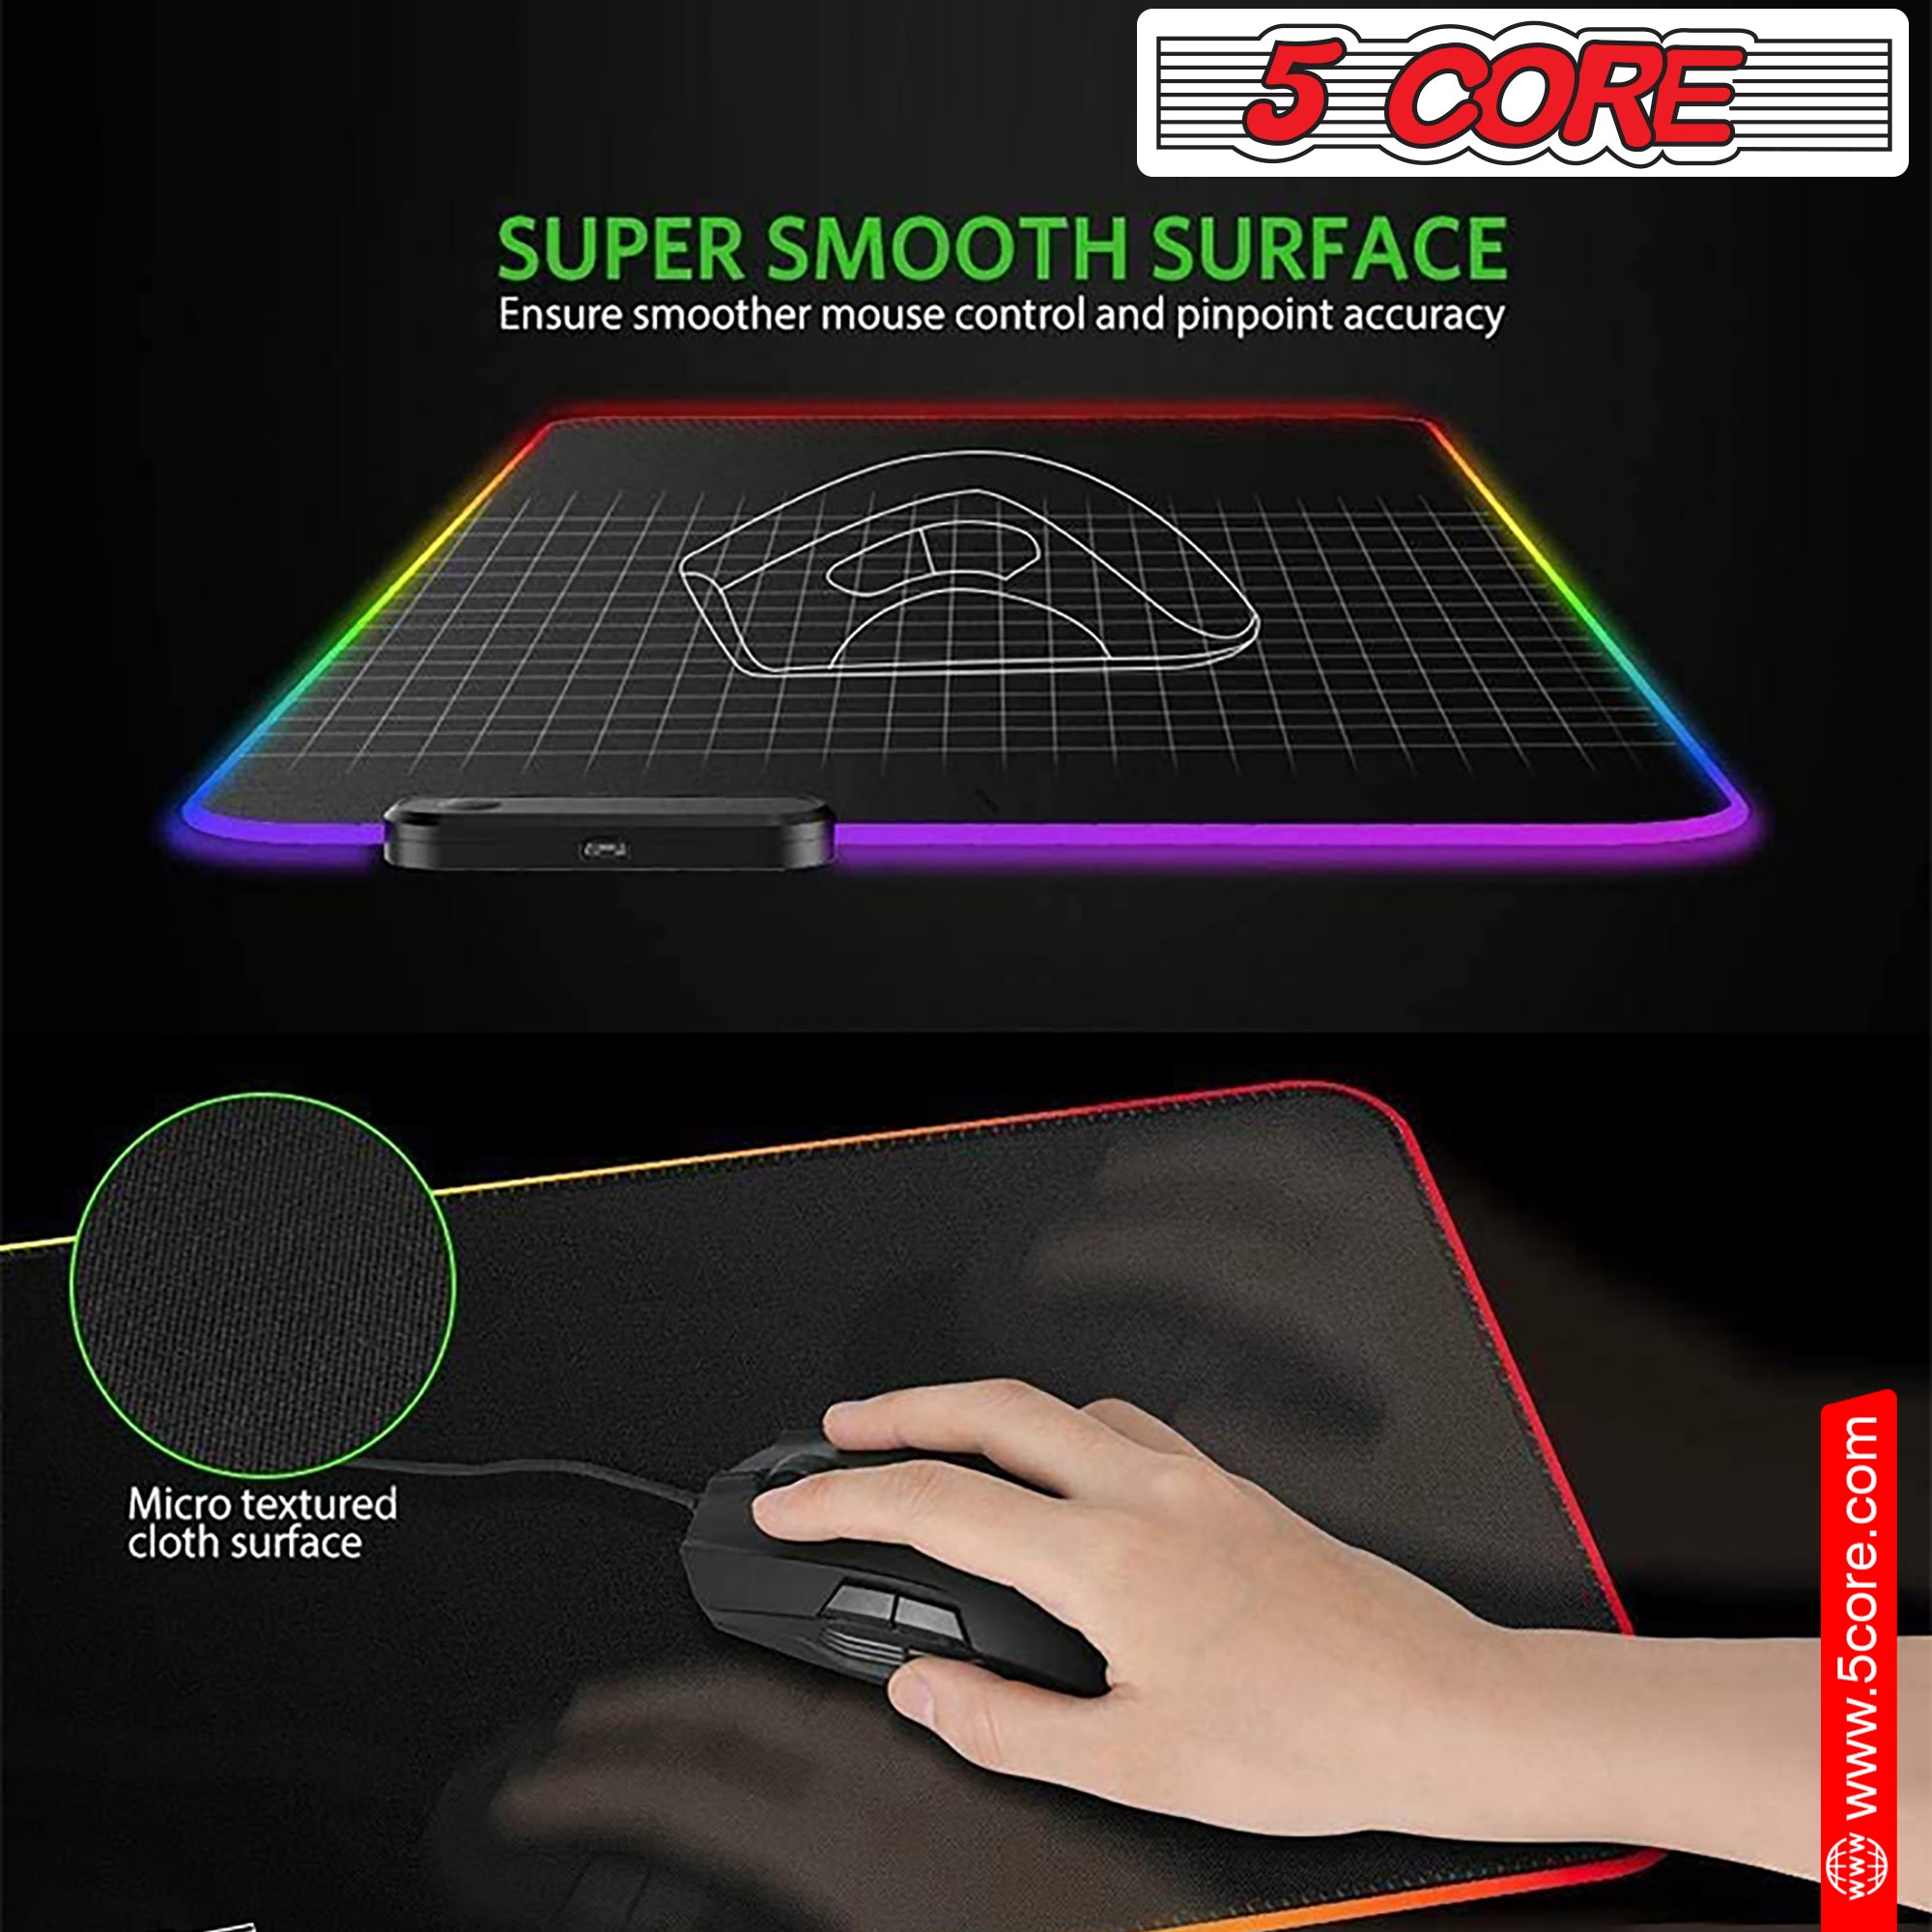 5 Core Large Mouse Pad Computer Mouse Mat with RGB Light Anti-Slip Rubber Base Easy Gliding Spill-Resistant Surface Extended Mousepad -KBP 800 RGB